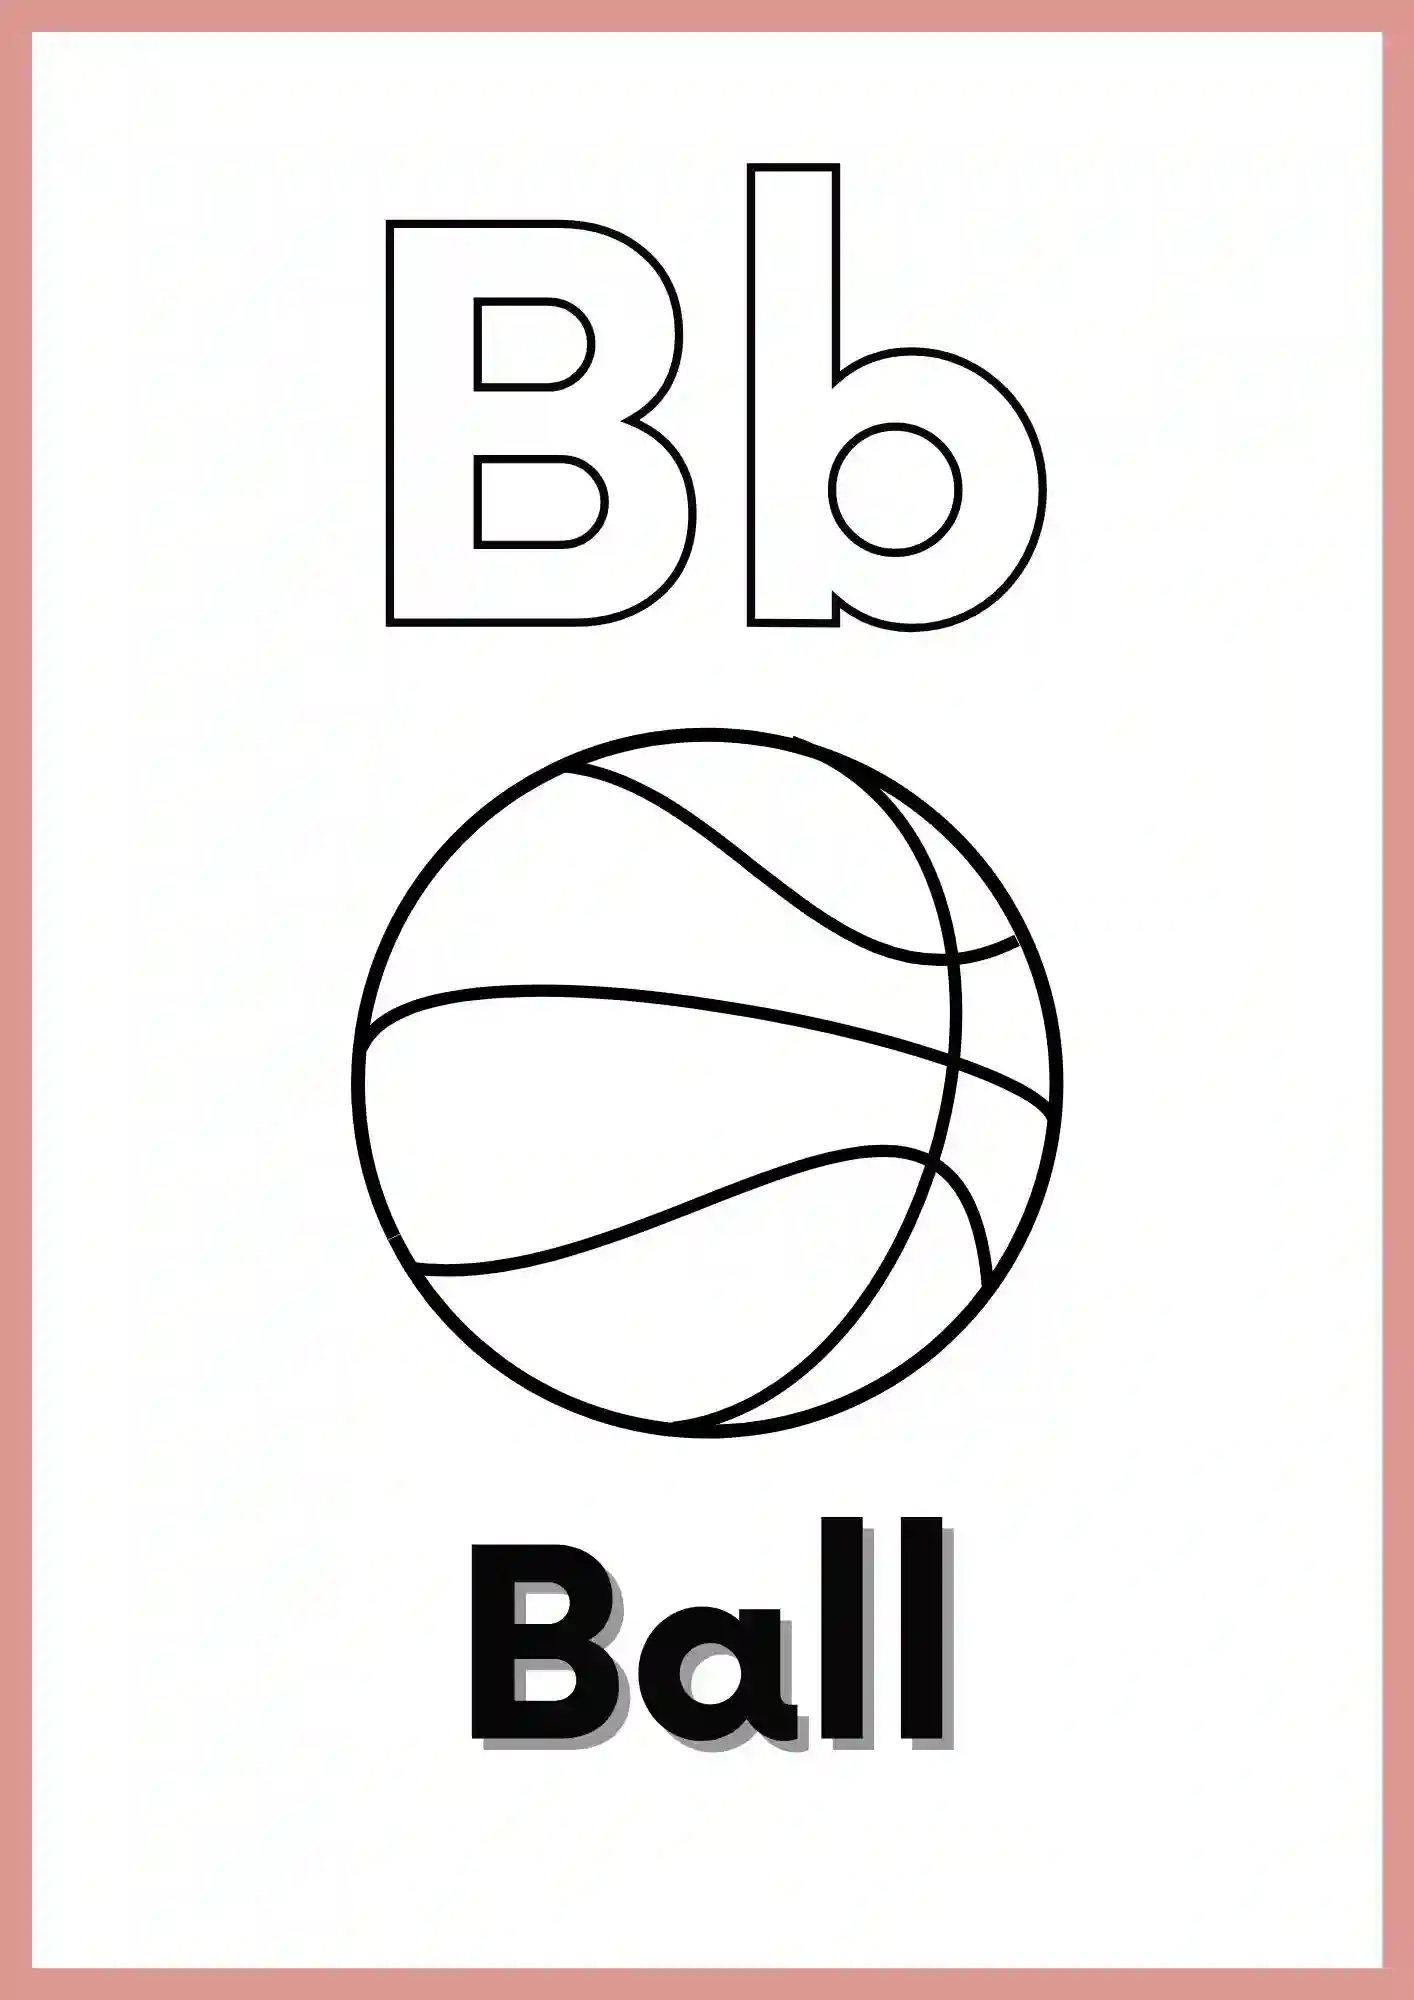 Letter B with BALL colouring worksheet